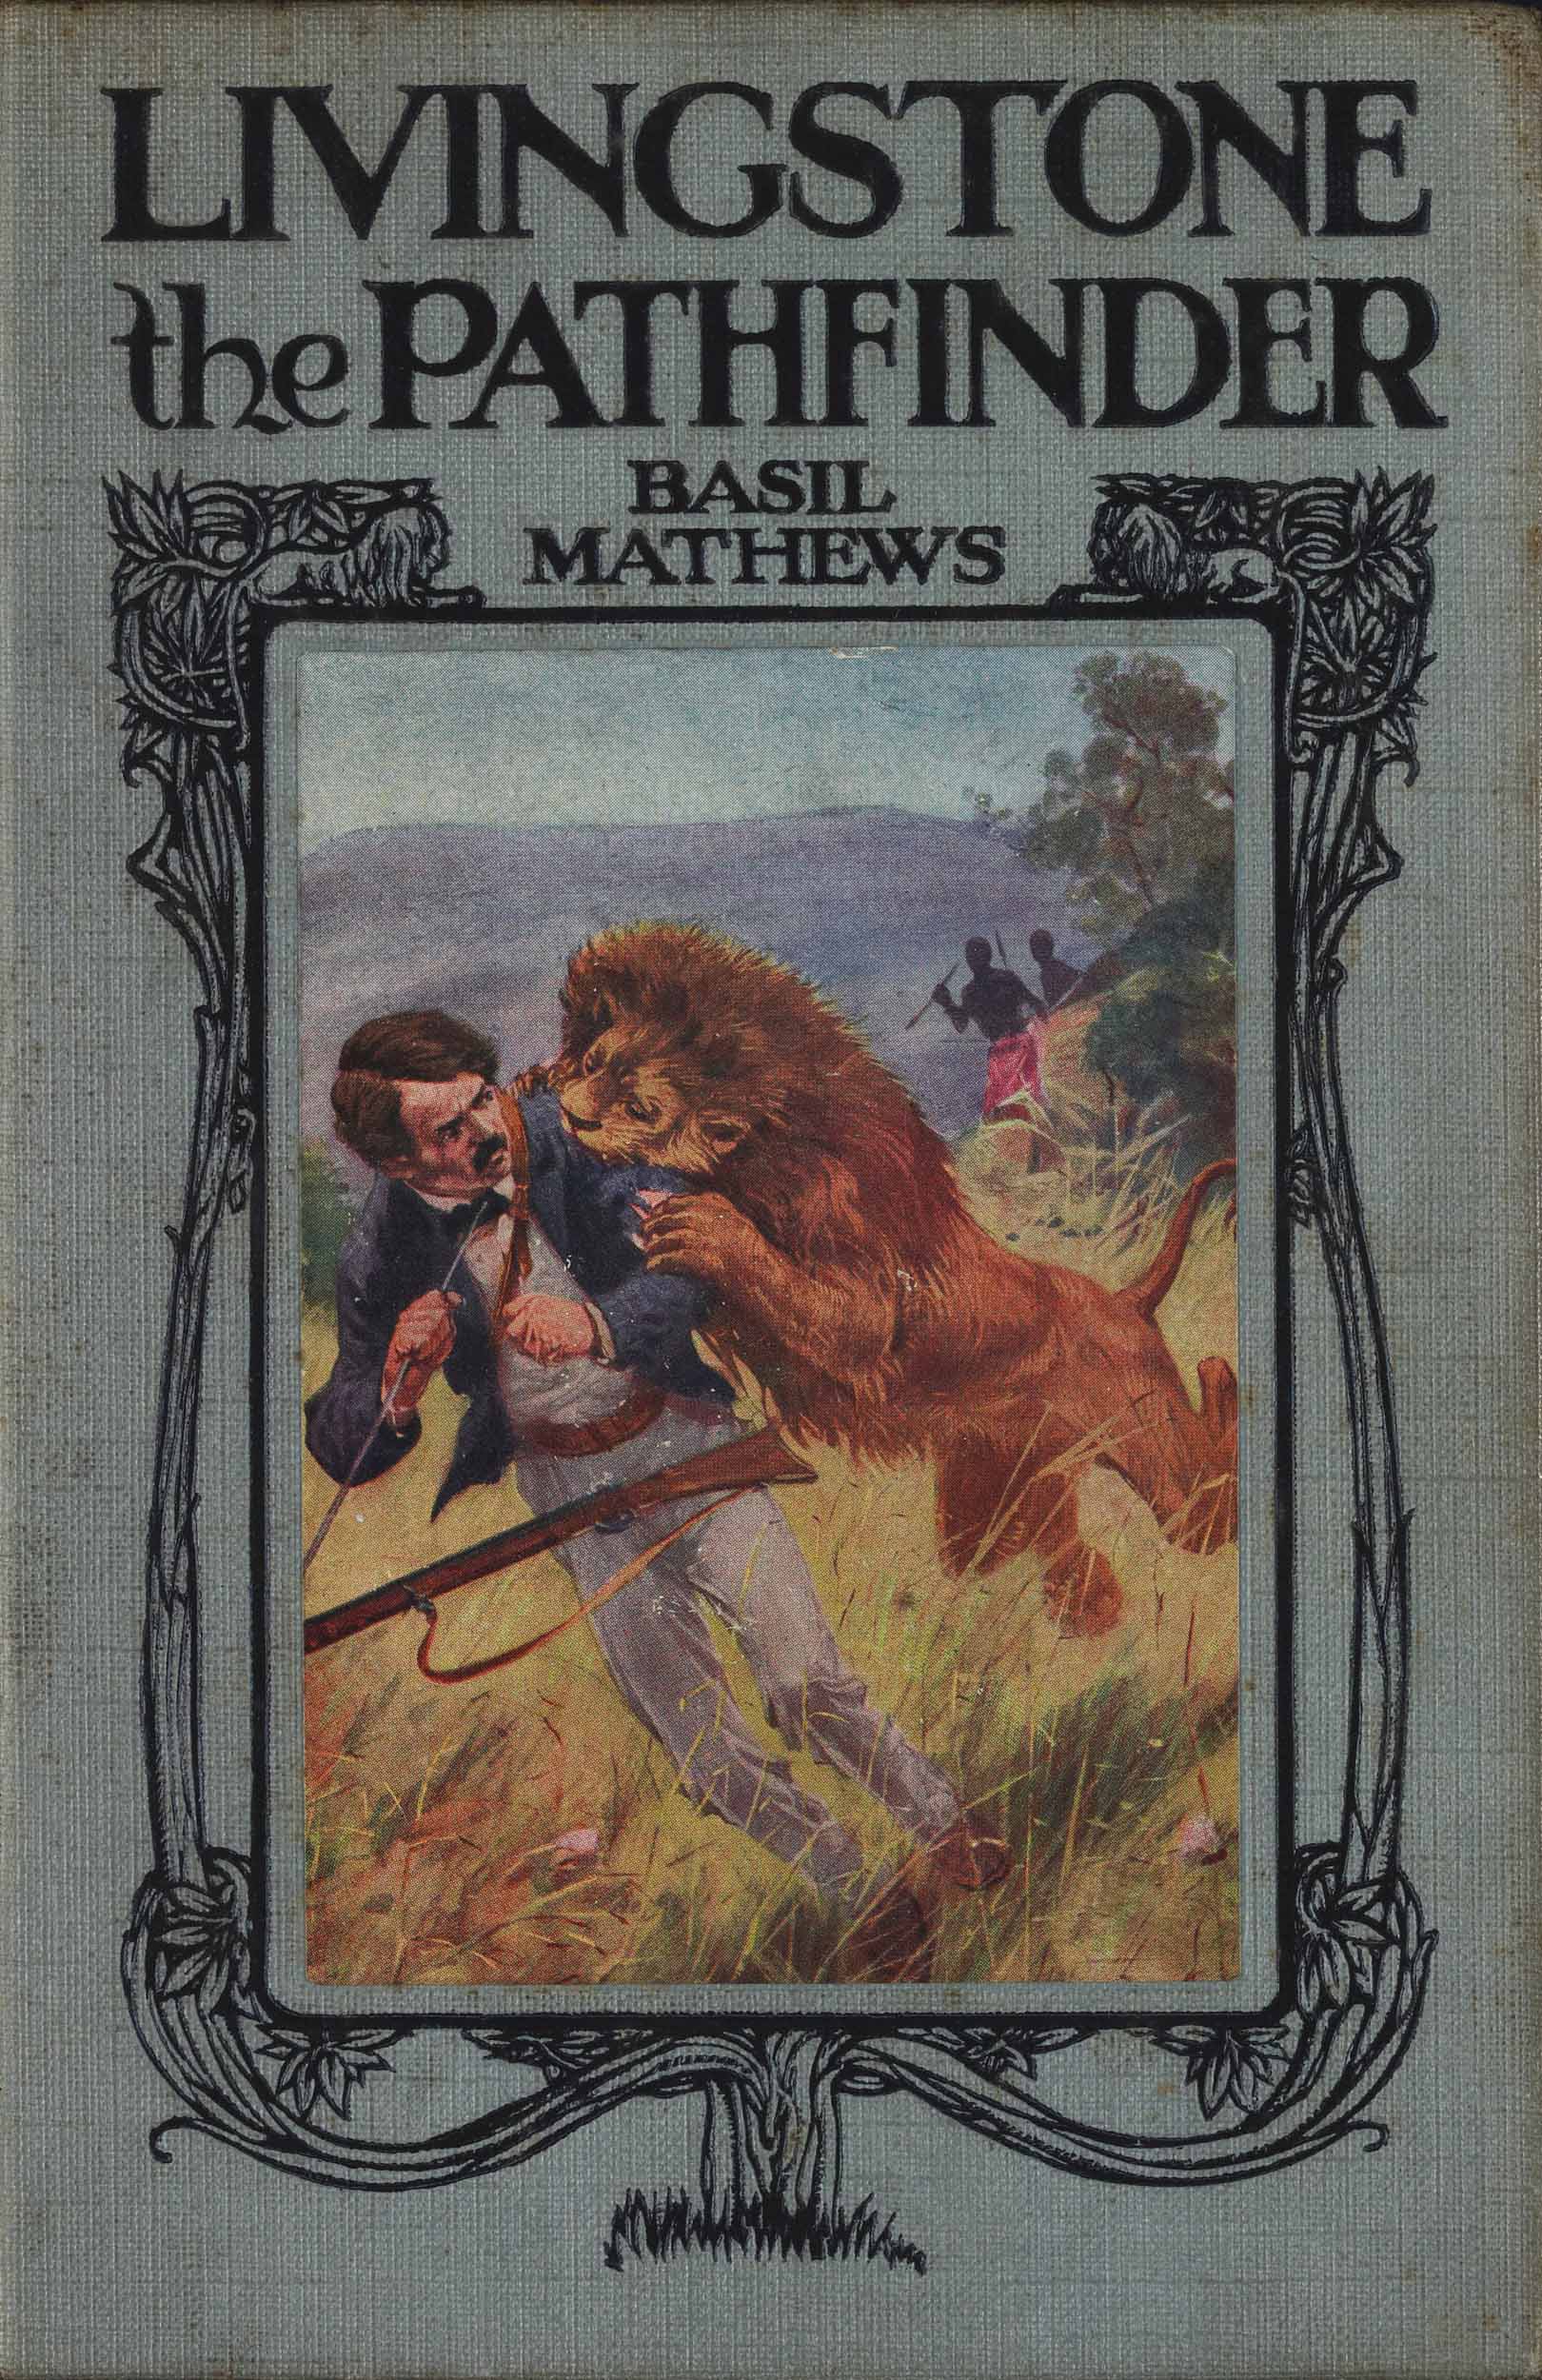 Livingstone the Pathfinder (Cover), 1912, by Basil Matthews and Earnest Prater. Copyright National Library of Scotland. Creative Commons Share-alike 2.5 UK: Scotland (https://creativecommons.org/licenses/by-nc-sa/2.5/scotland/).